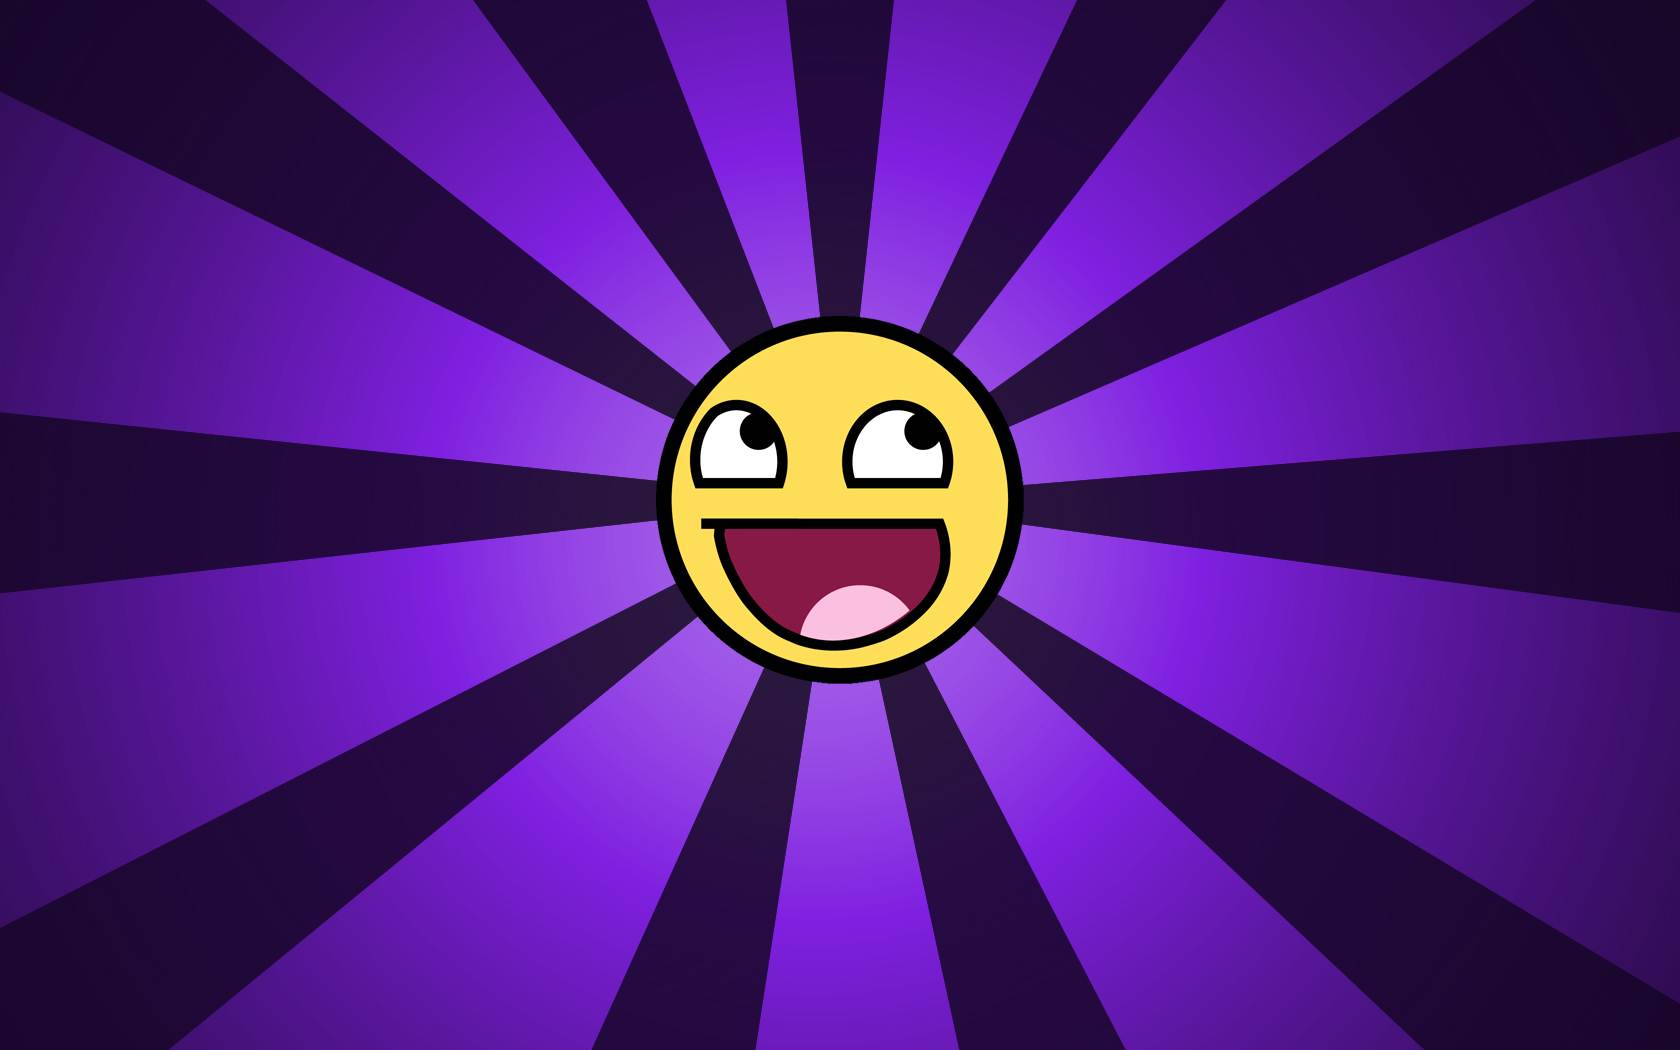 Awesome Purple Backgrounds - Wallpaper Cave